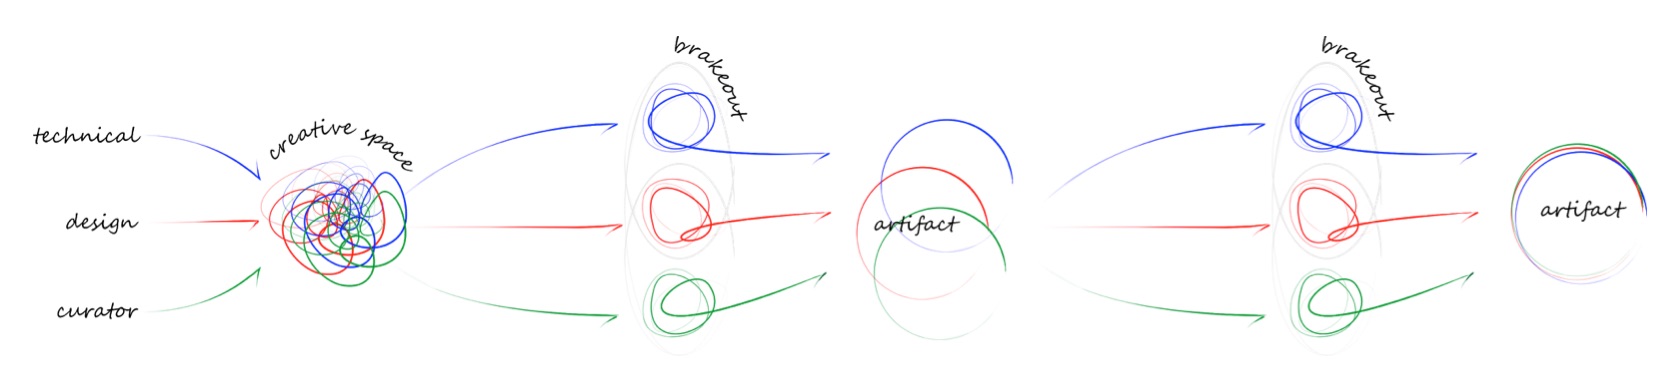 Figure 10. How the different disciplines intertwine during the development of the creative process.